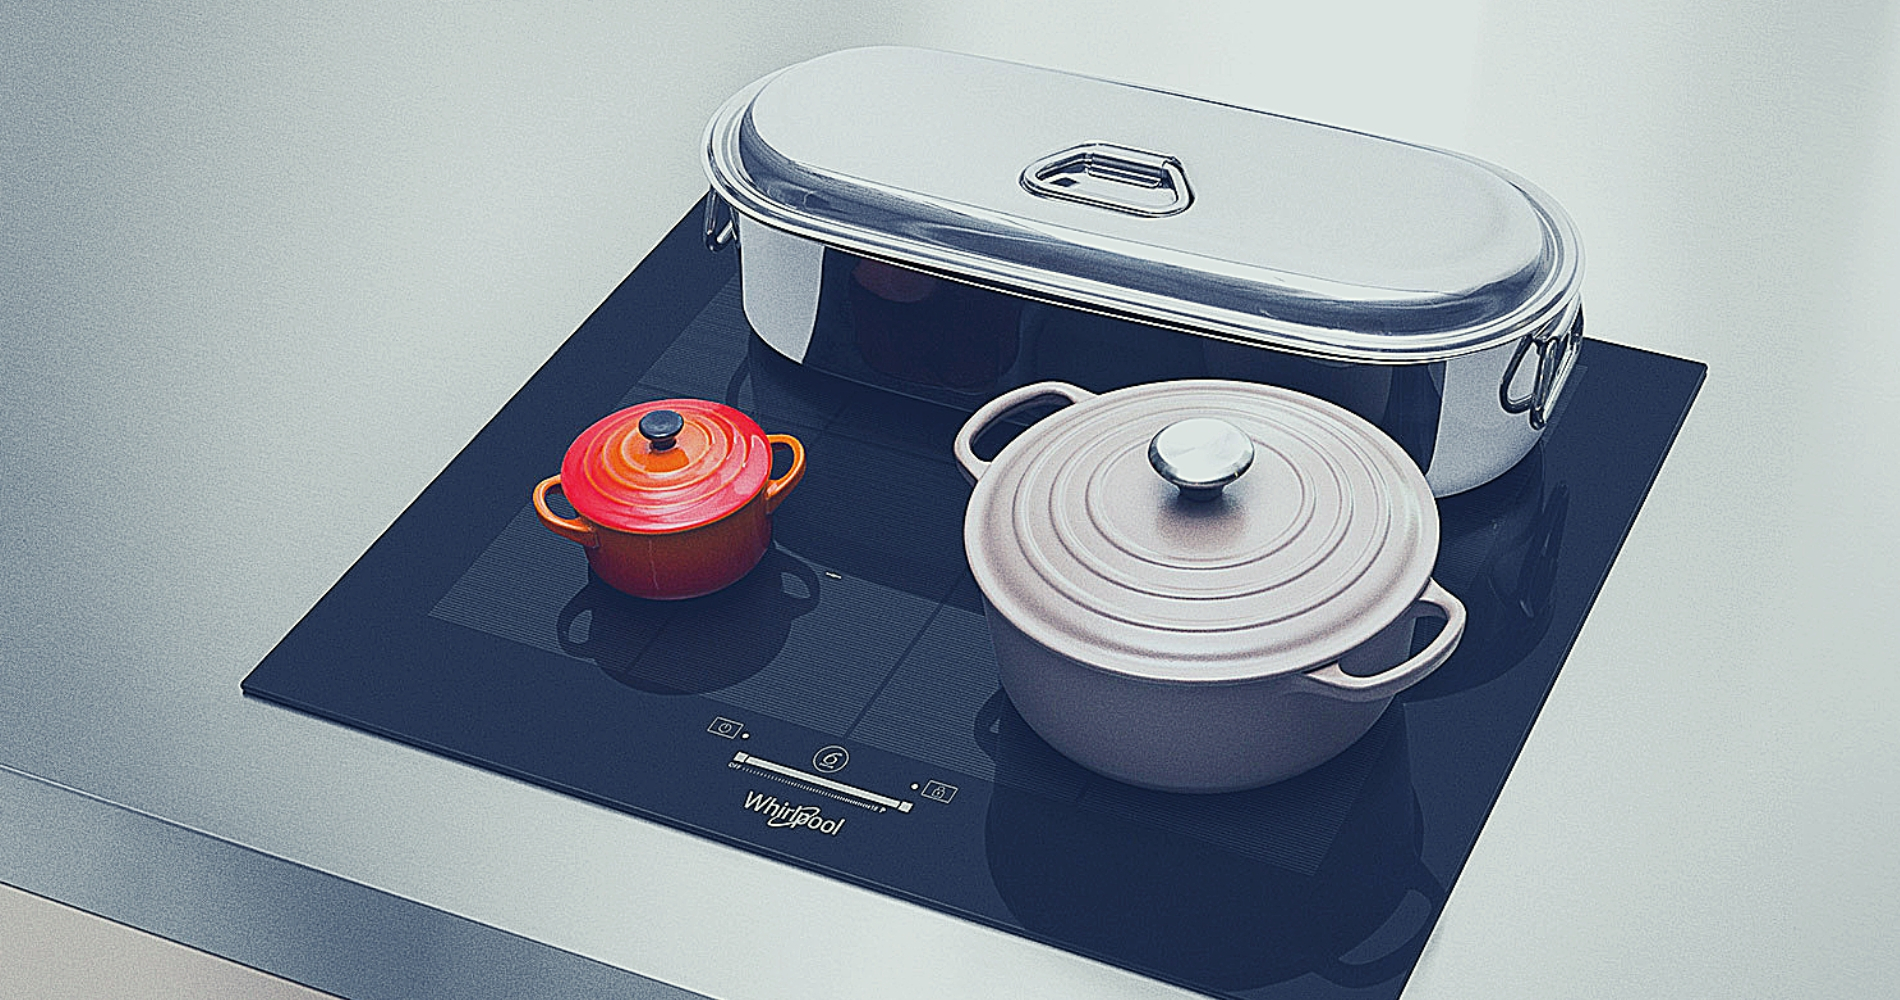 Is Creuset suitable for hobs? | Dutch & Cookware